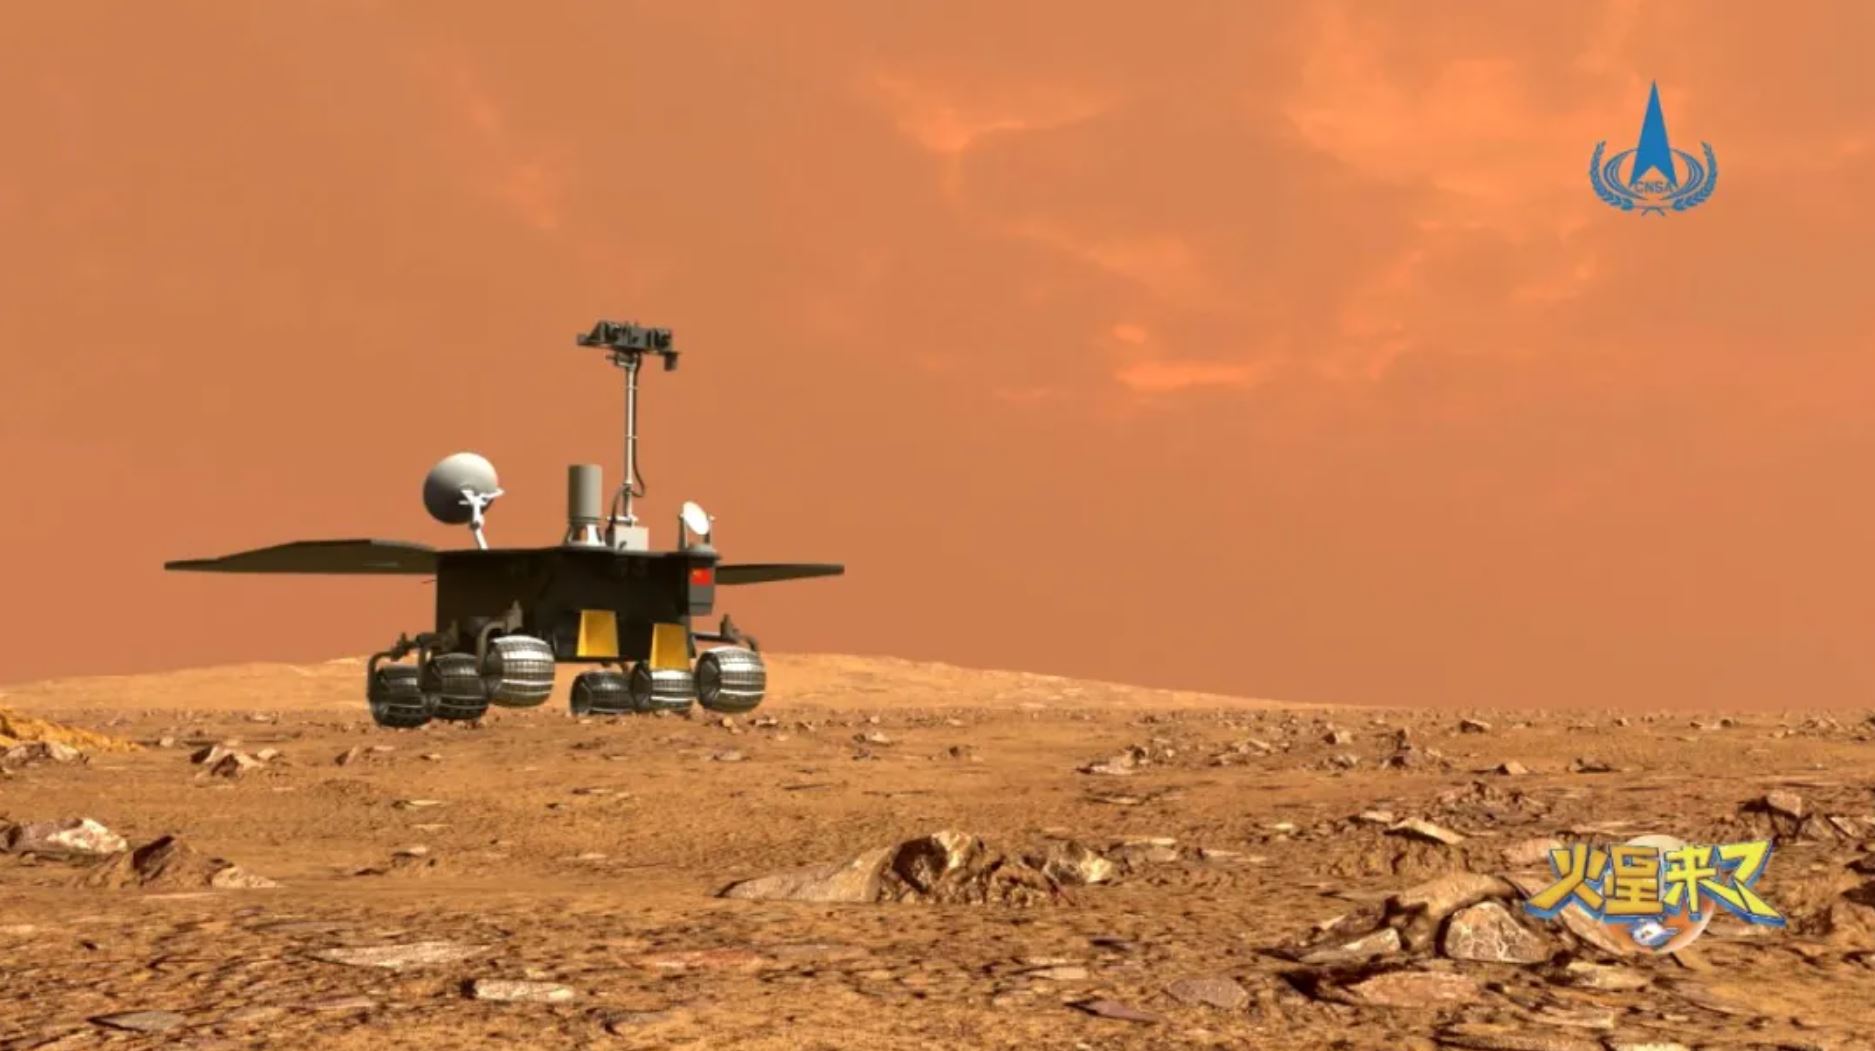 Meet Zhurong: China names its Mars rover after fire god ahead of mid-May  landing attempt | Space